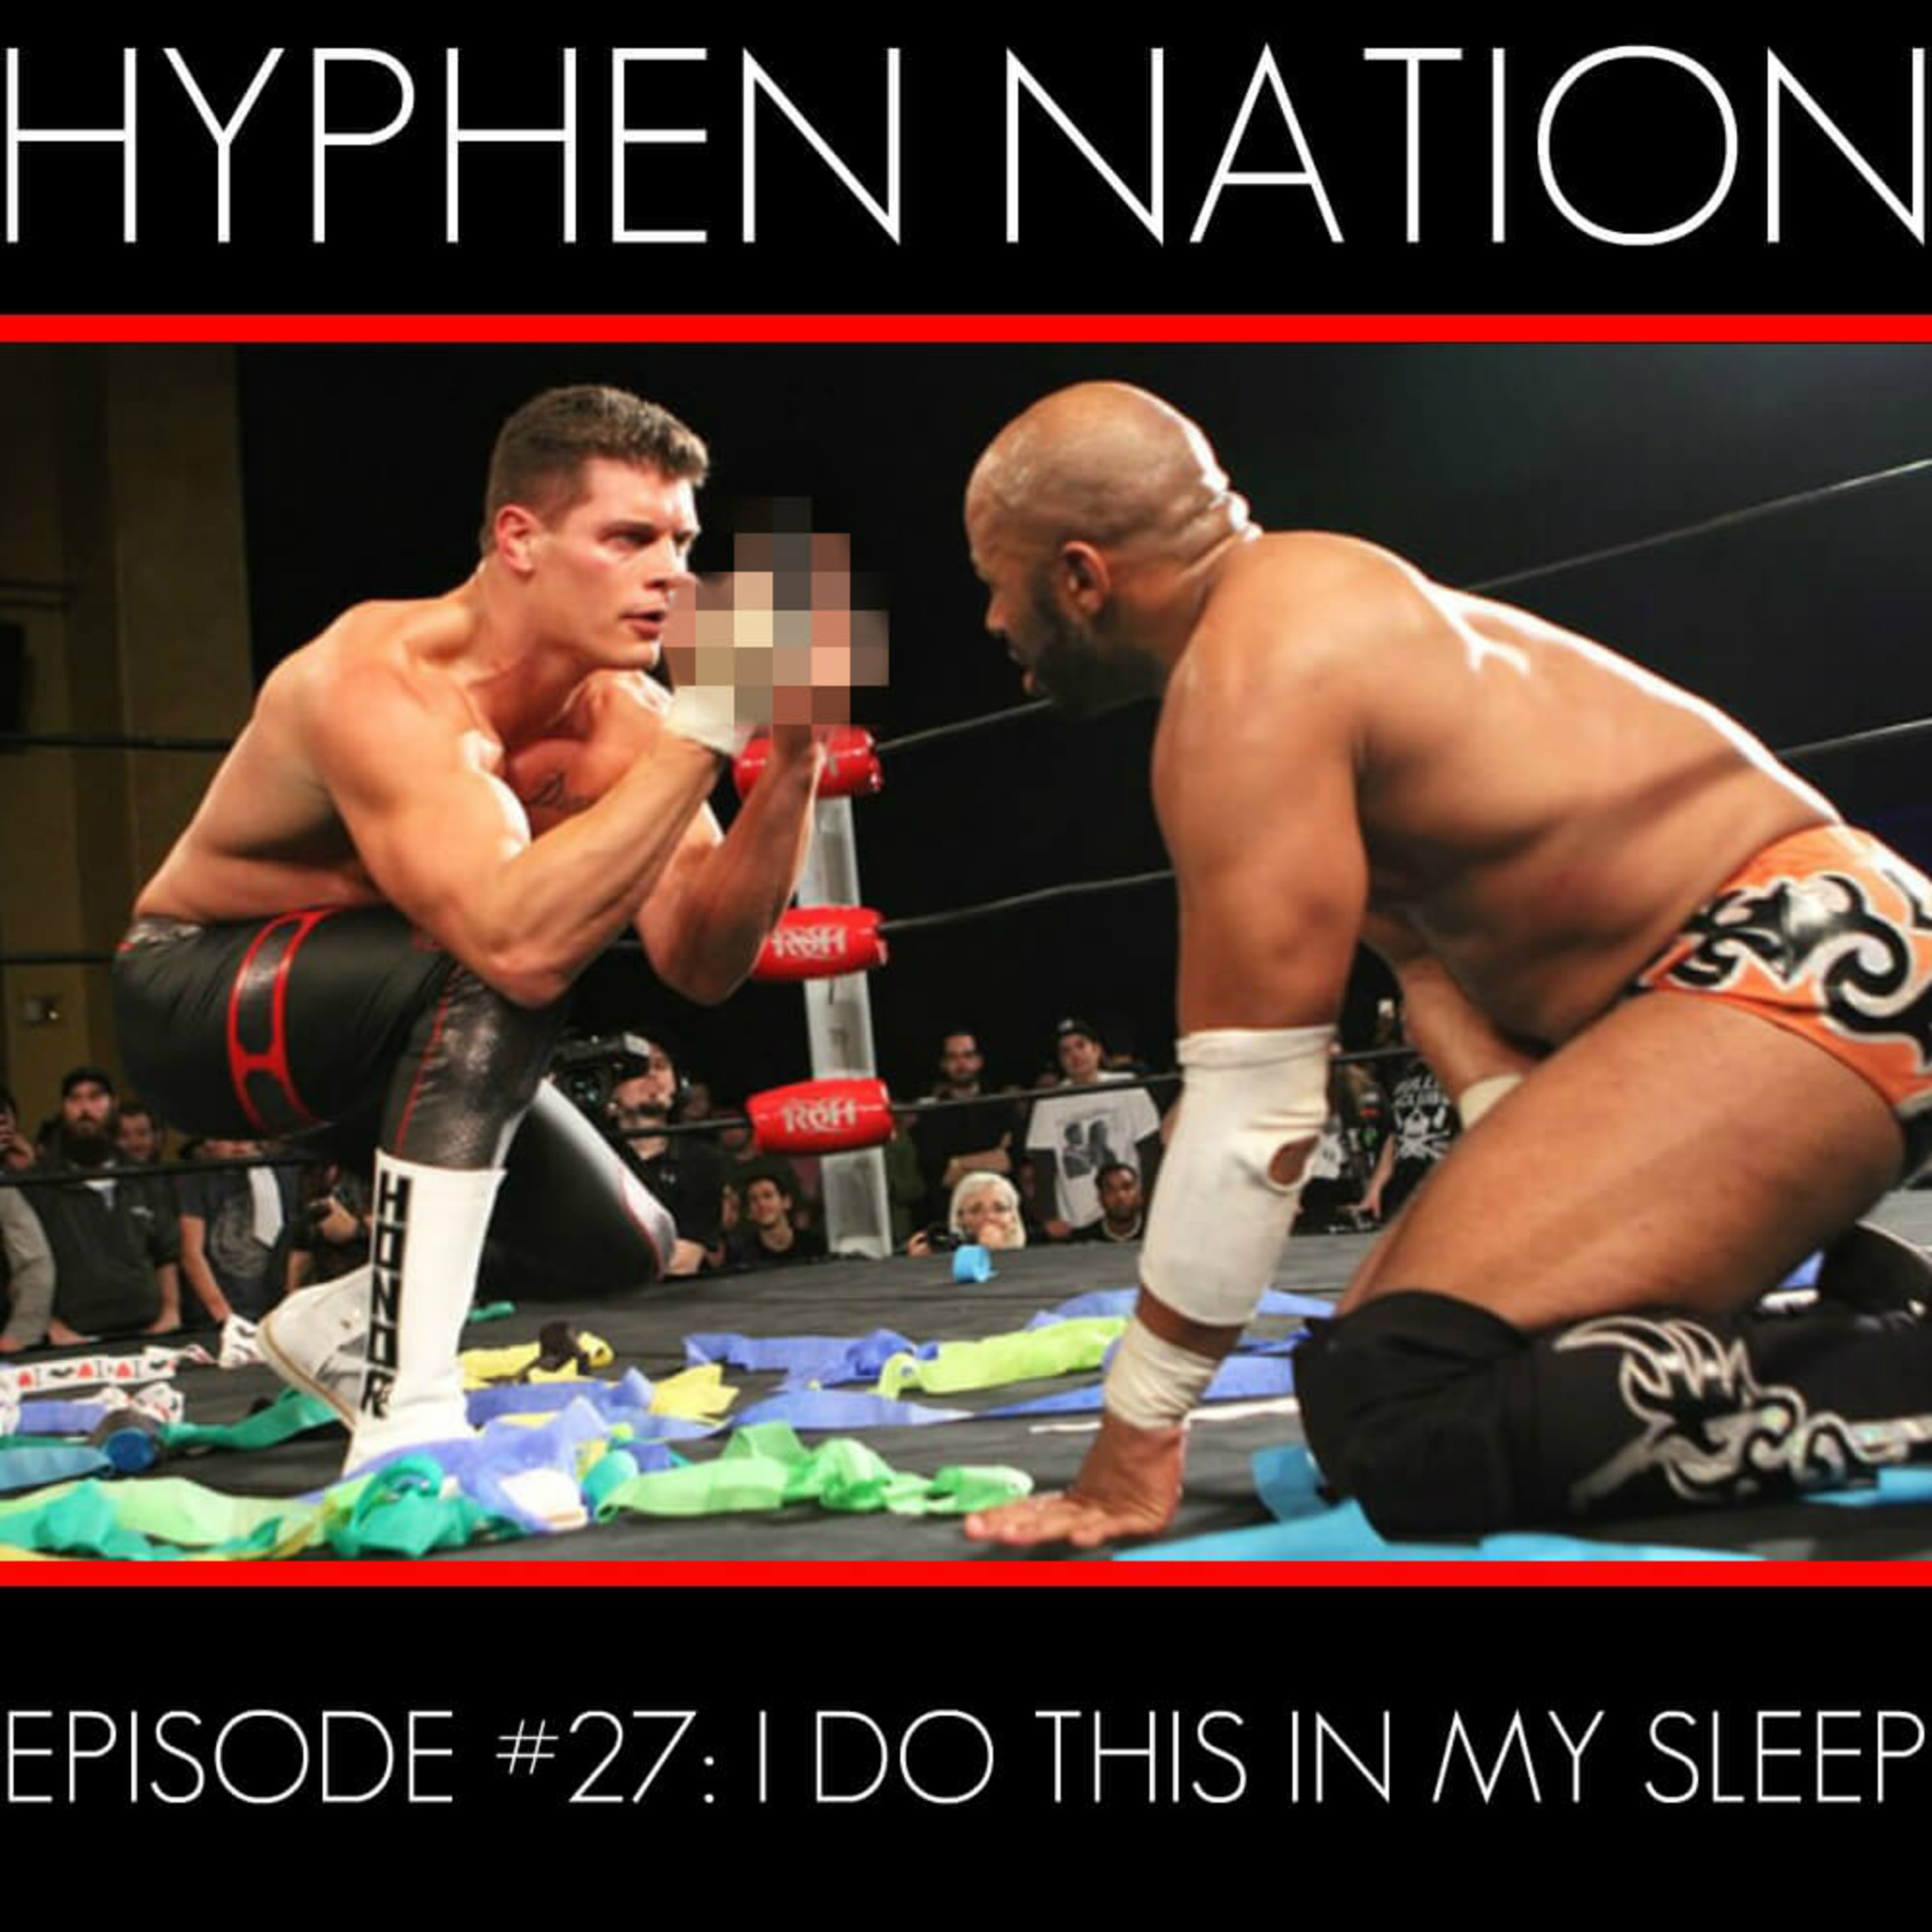 Episode #27: I Do This In My Sleep